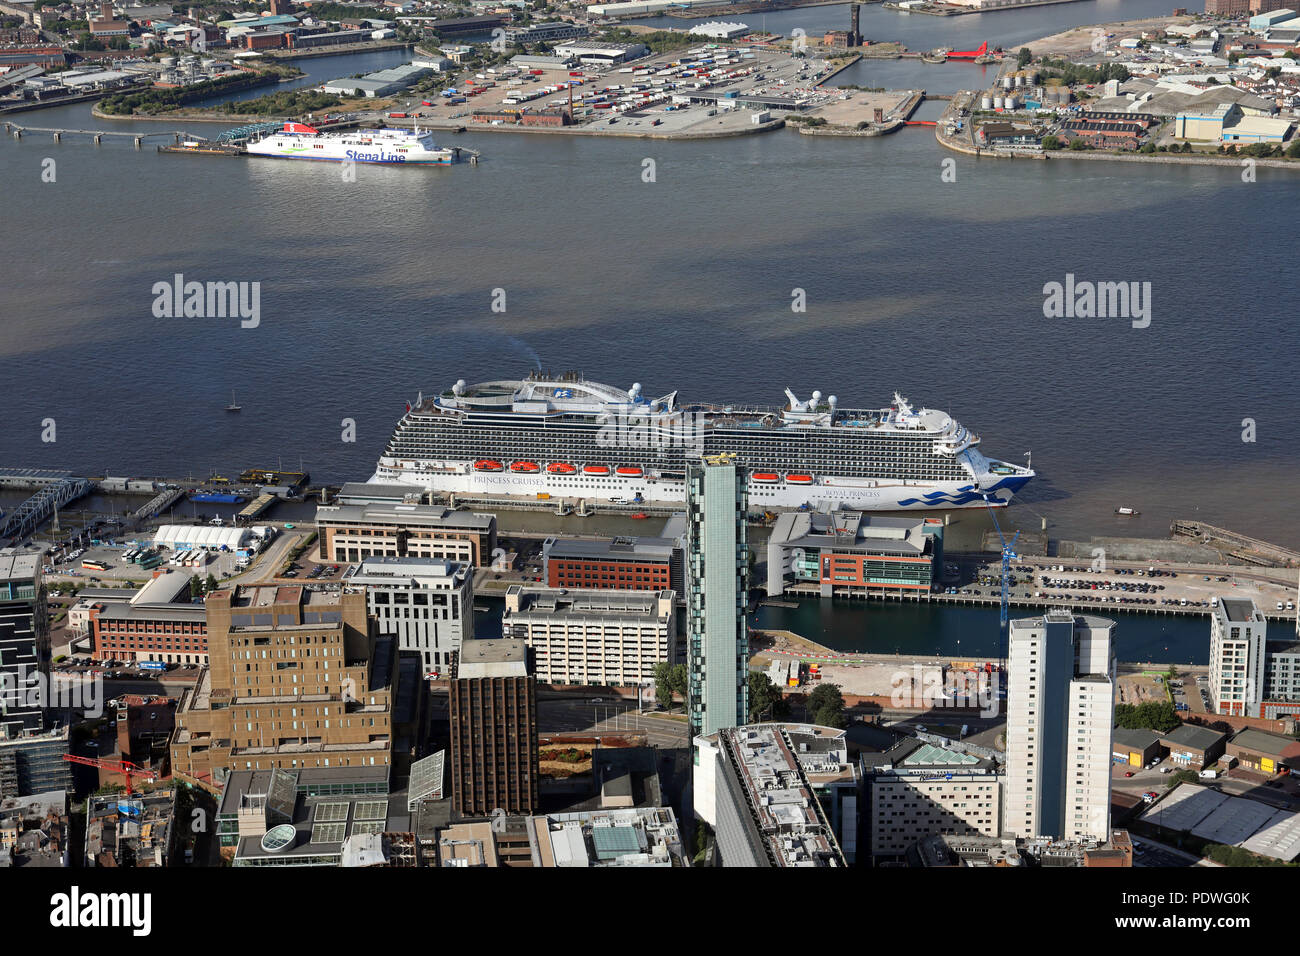 aerial view of the MS Royal Princess cruise liner at dock in Liverpool, UK Stock Photo